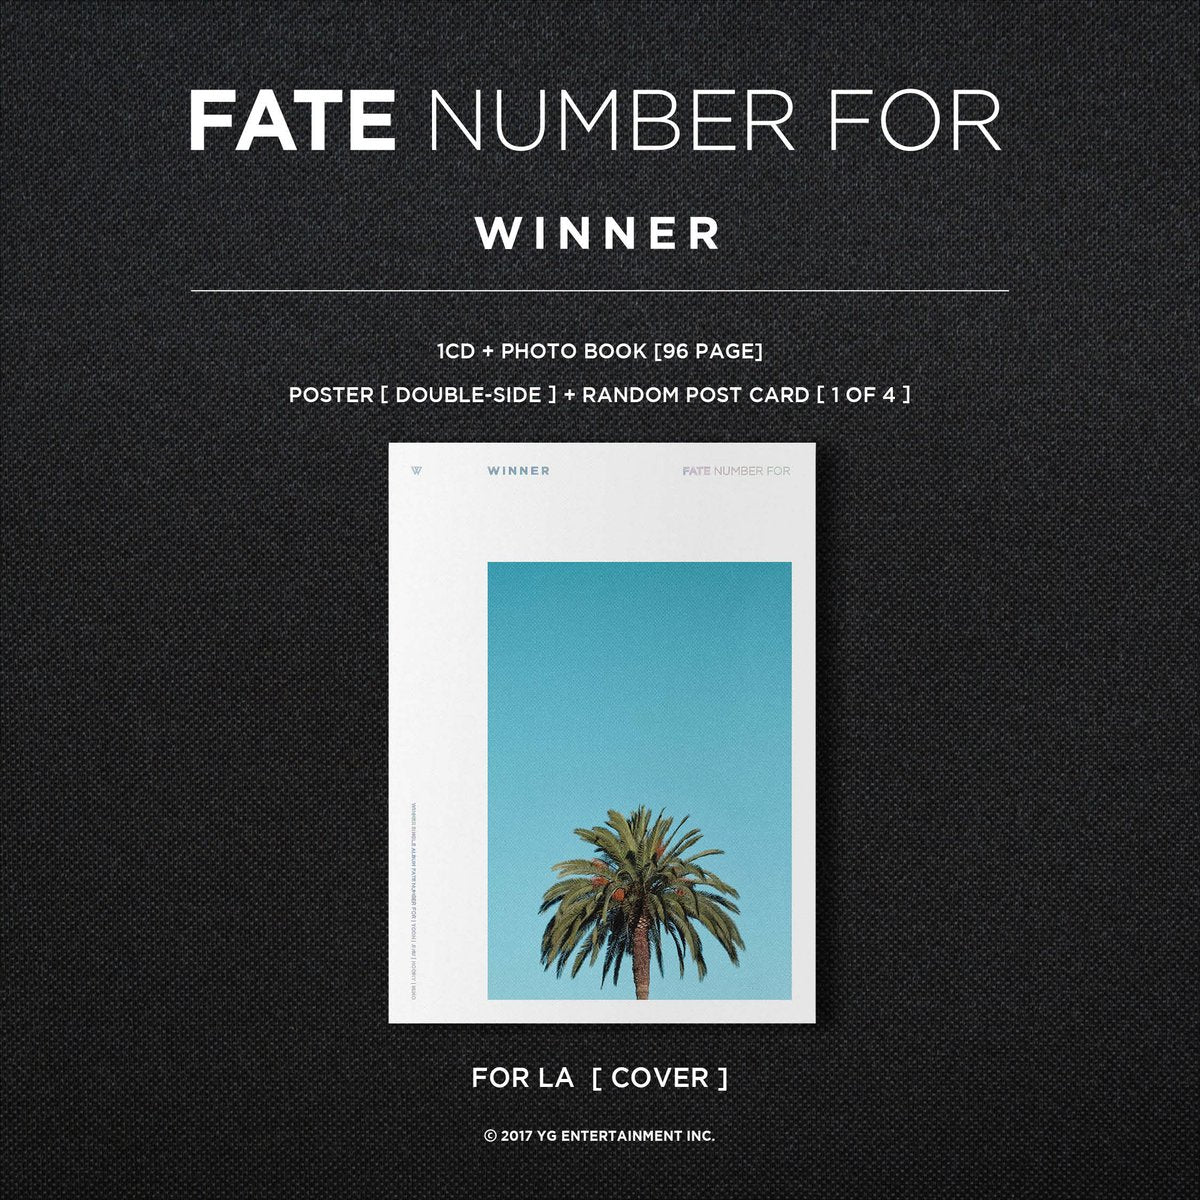 WINNER - Fate Number For